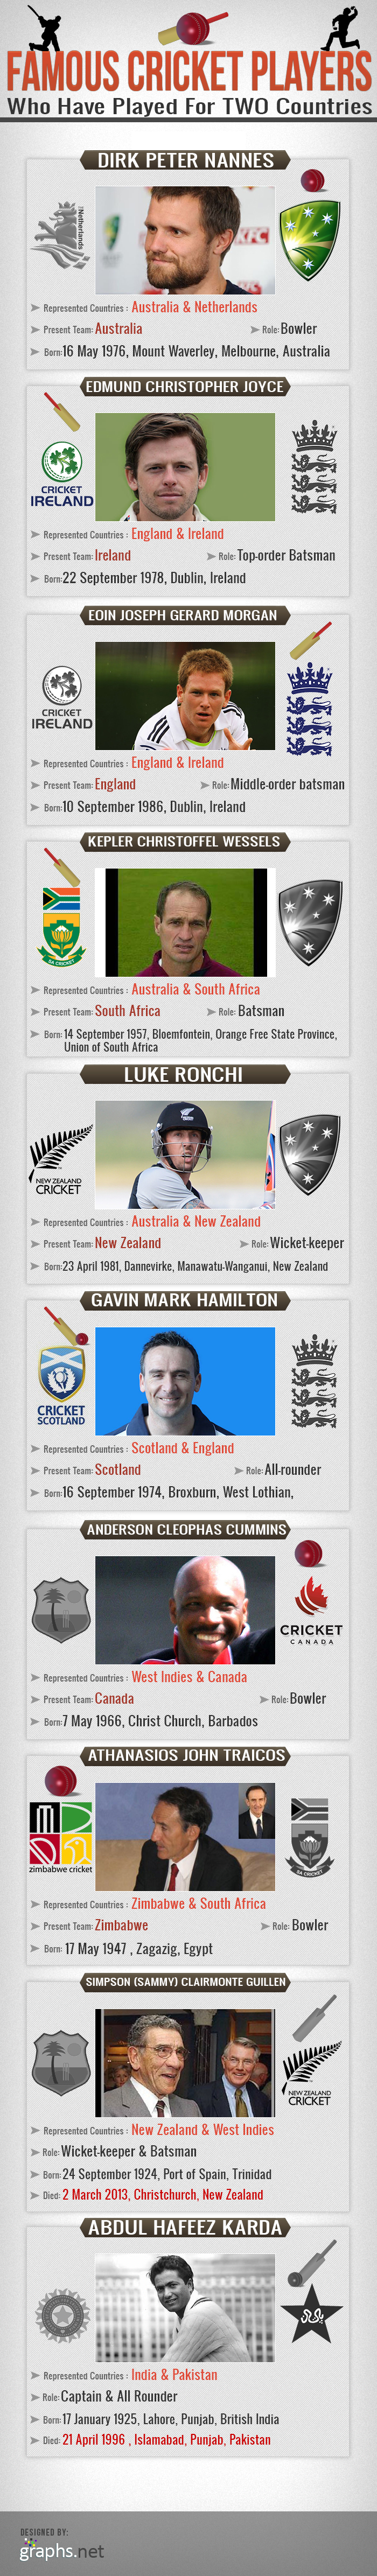 Famous Cricket Players who have Played for Two Countries